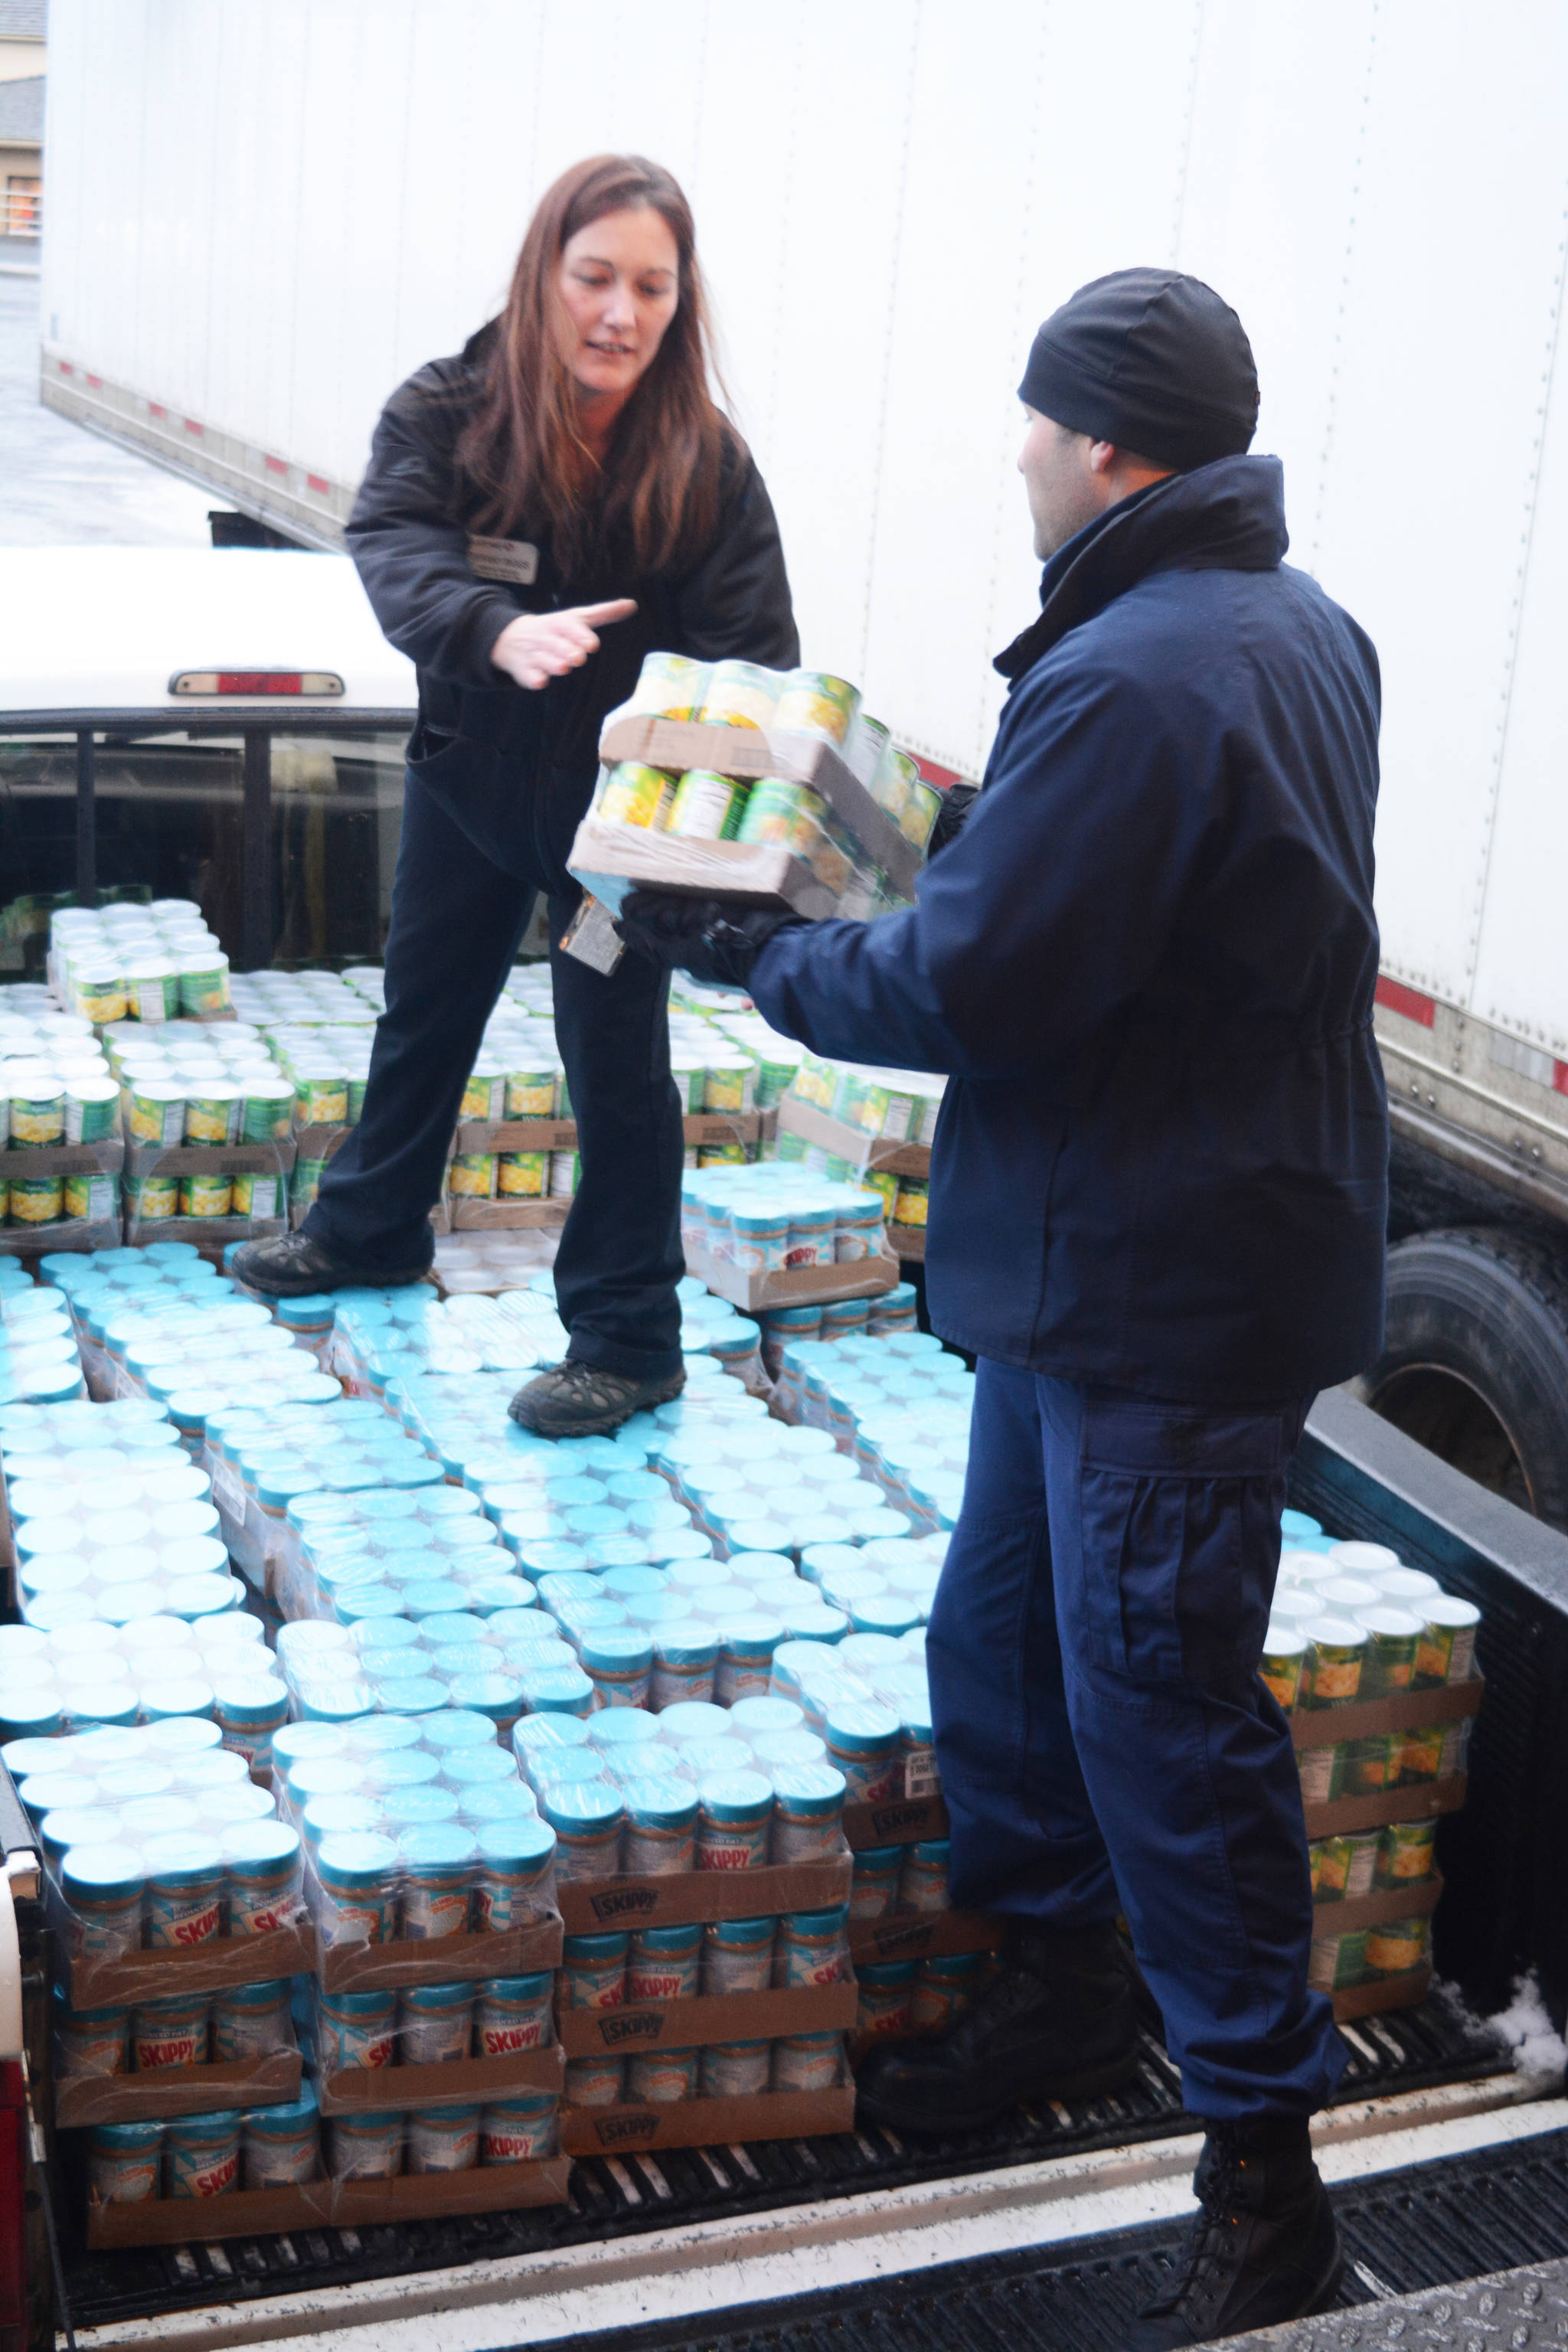 U.S. Coast Guard Cutter Naushon crew member James Bannon, right, helps Homer Safeway assistant store manager Tiffany Biggs, center, load Hunger Bag food onto a truck, Dec. 5, 2017. Bannon and fellow crew member Jordan Dorchin delivered food to the Homer Community Food Pantry on Tuesday that had been purchased by Safeway customers as part of its Hunger Bag project. Store Manager Bob Malone said about 1,300 bags at $10 each had been sold at the Homer store since Nov. 1. Through a national program, Safeway sells the bags and donates food to charities chosen by local stores. Pallets of food are organized at the Anchorage warehouse and sent to Homer. “This year, from what I understand, the need is more than normal,” Malone said. (Photo by Michael Armstrong, Homer News)